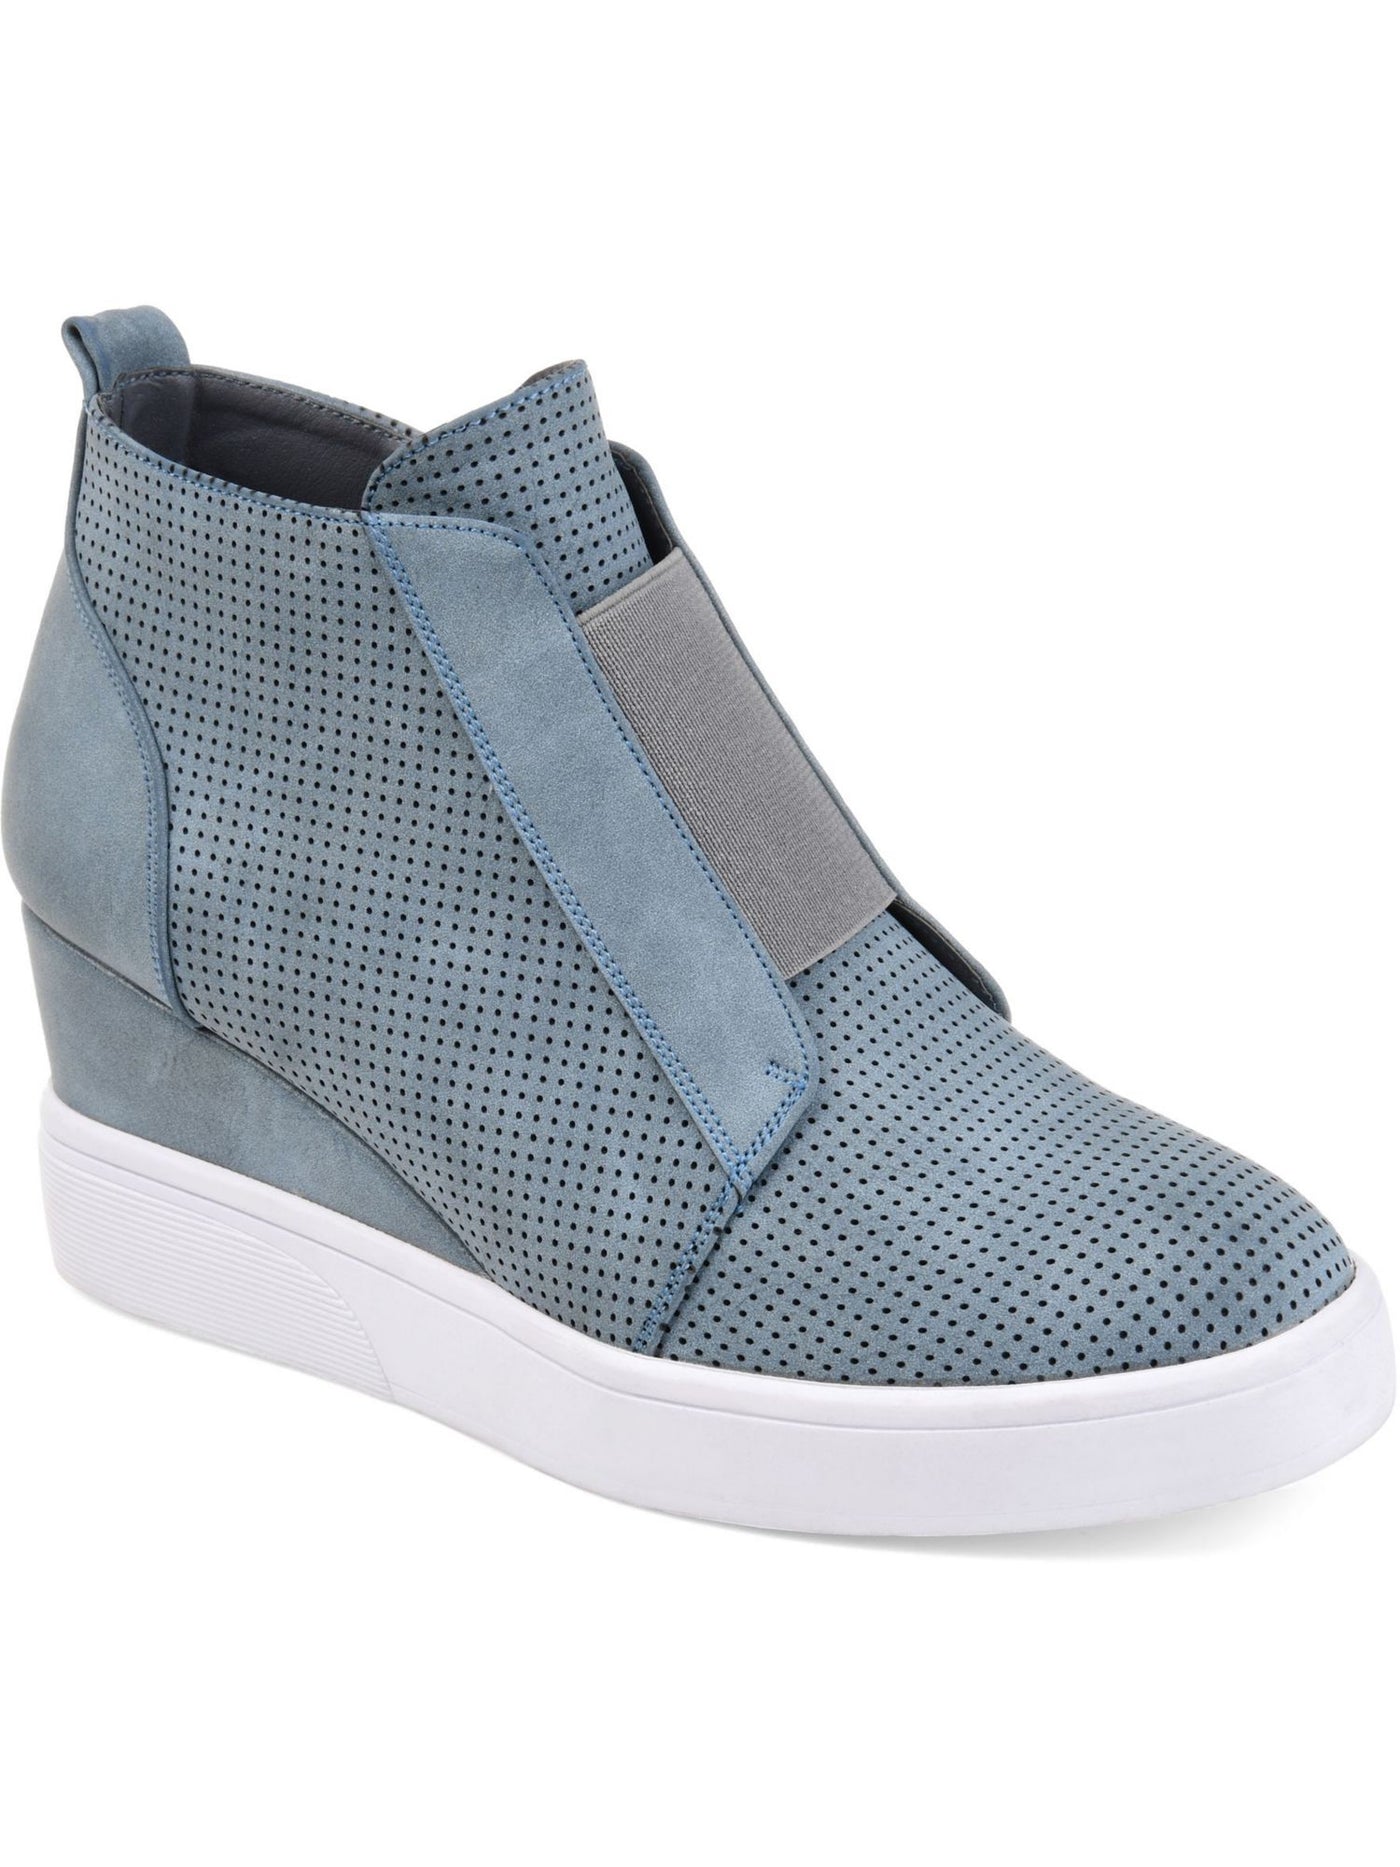 JOURNEE COLLECTION Womens Blue Pinhole Texture 1" Platform Clara Almond Toe Wedge Zip-Up Athletic Sneakers Shoes 7 M